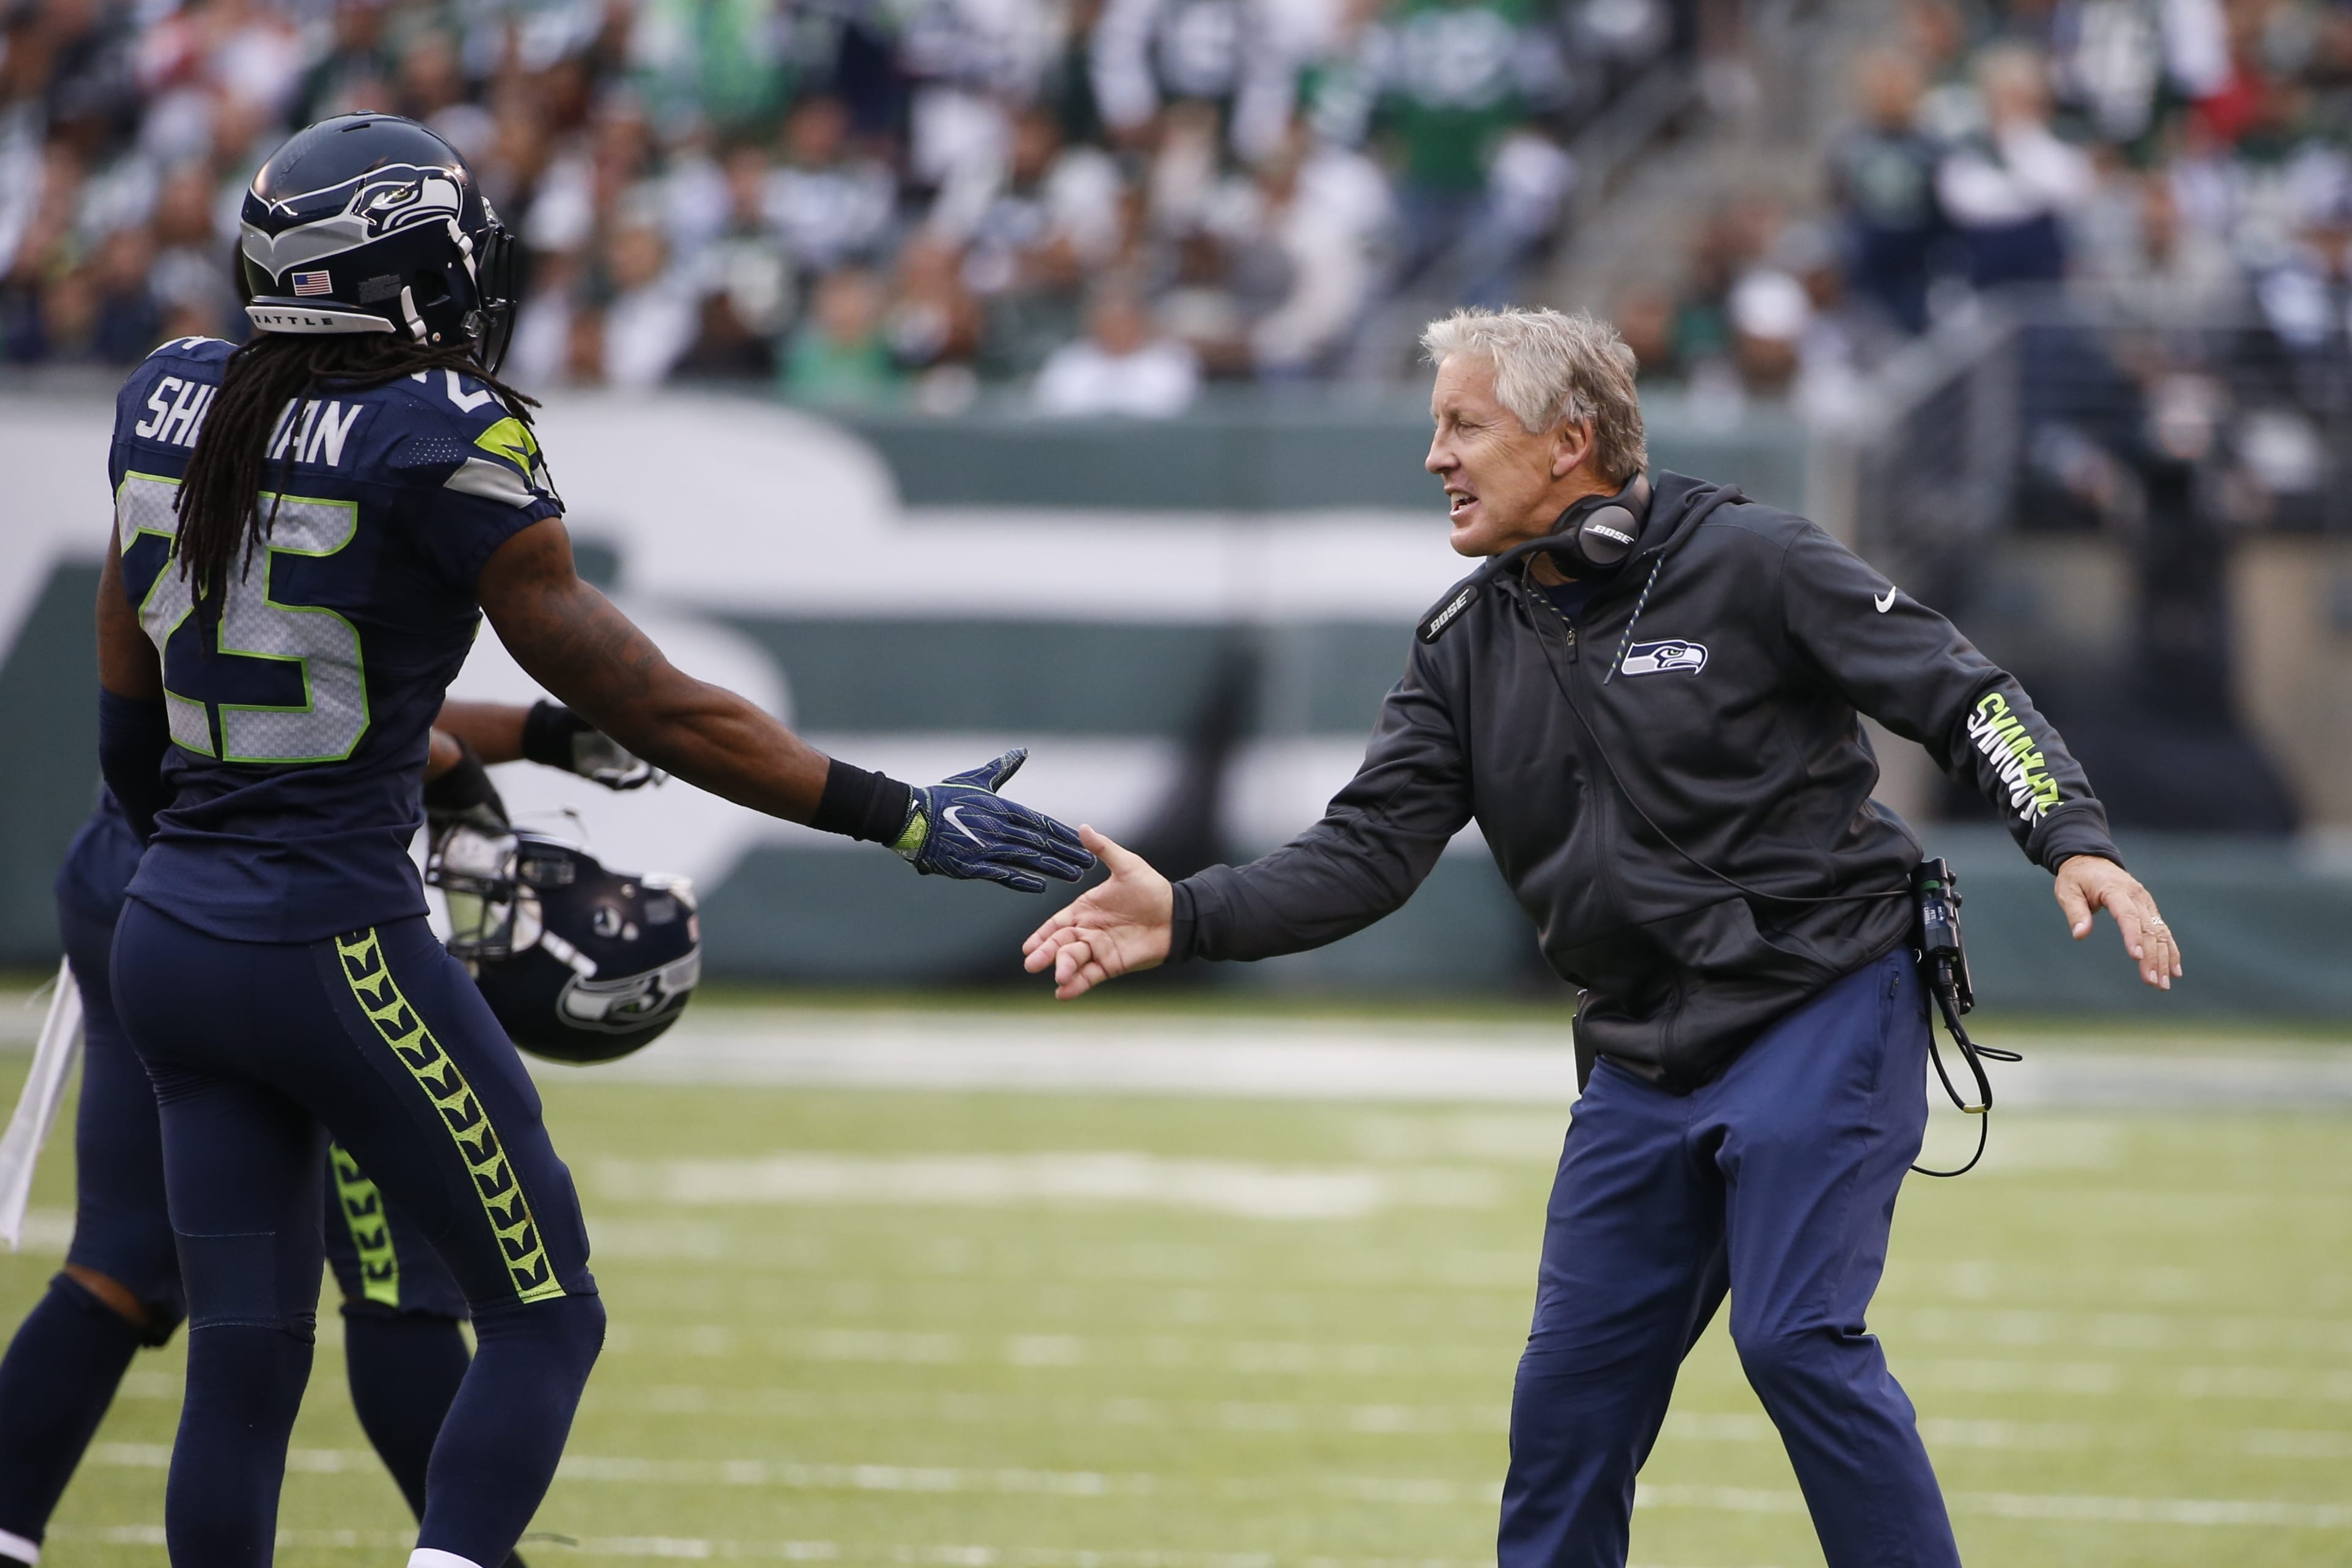 Seattle Seahawks head coach Pete Carroll celebrates with cornerback Richard Sherman (25) during the first half of an NFL football game against the New York Jets Sunday, Oct. 2, 2016, in East Rutherford, N.J.